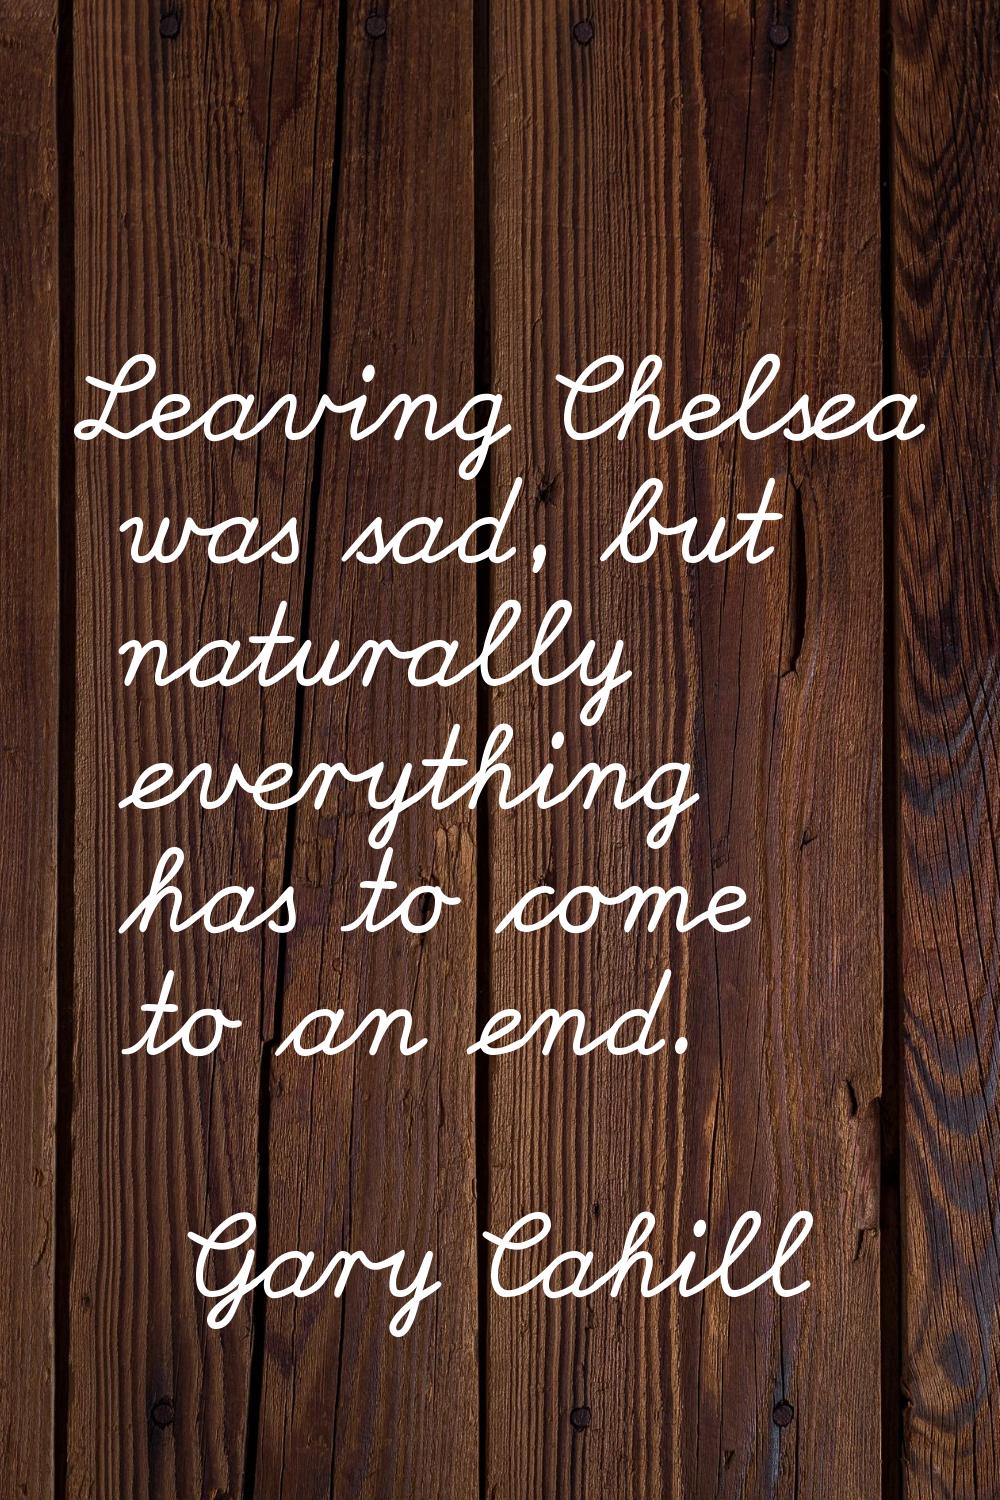 Leaving Chelsea was sad, but naturally everything has to come to an end.